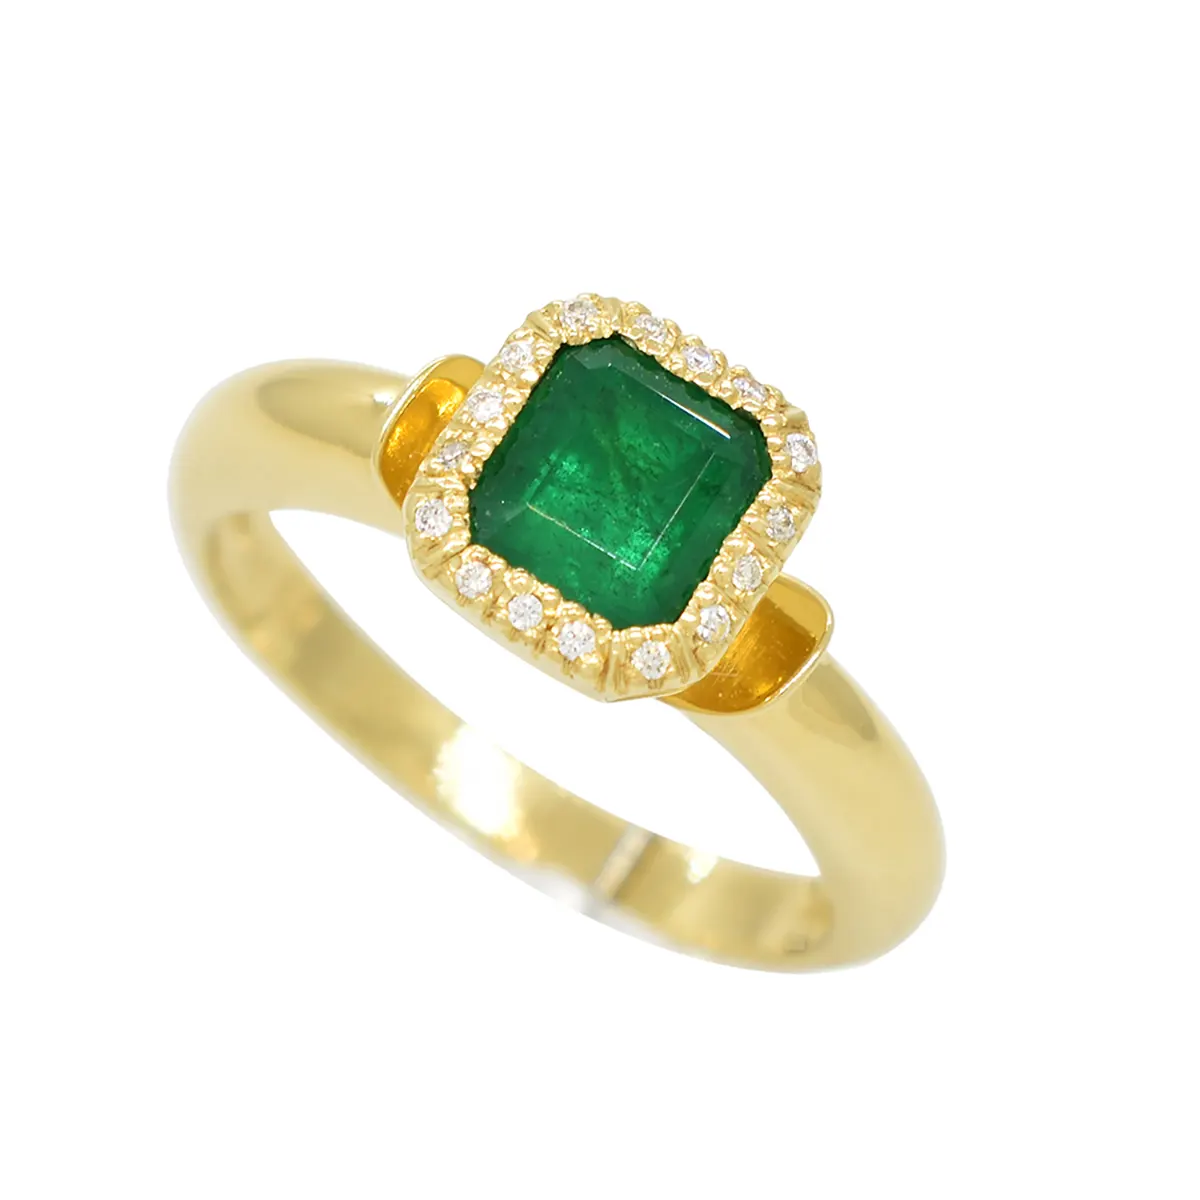 emerald-cut-emerald-in-18k-yellow-gold-ring-with-diamond-halo-in-bezel-setting